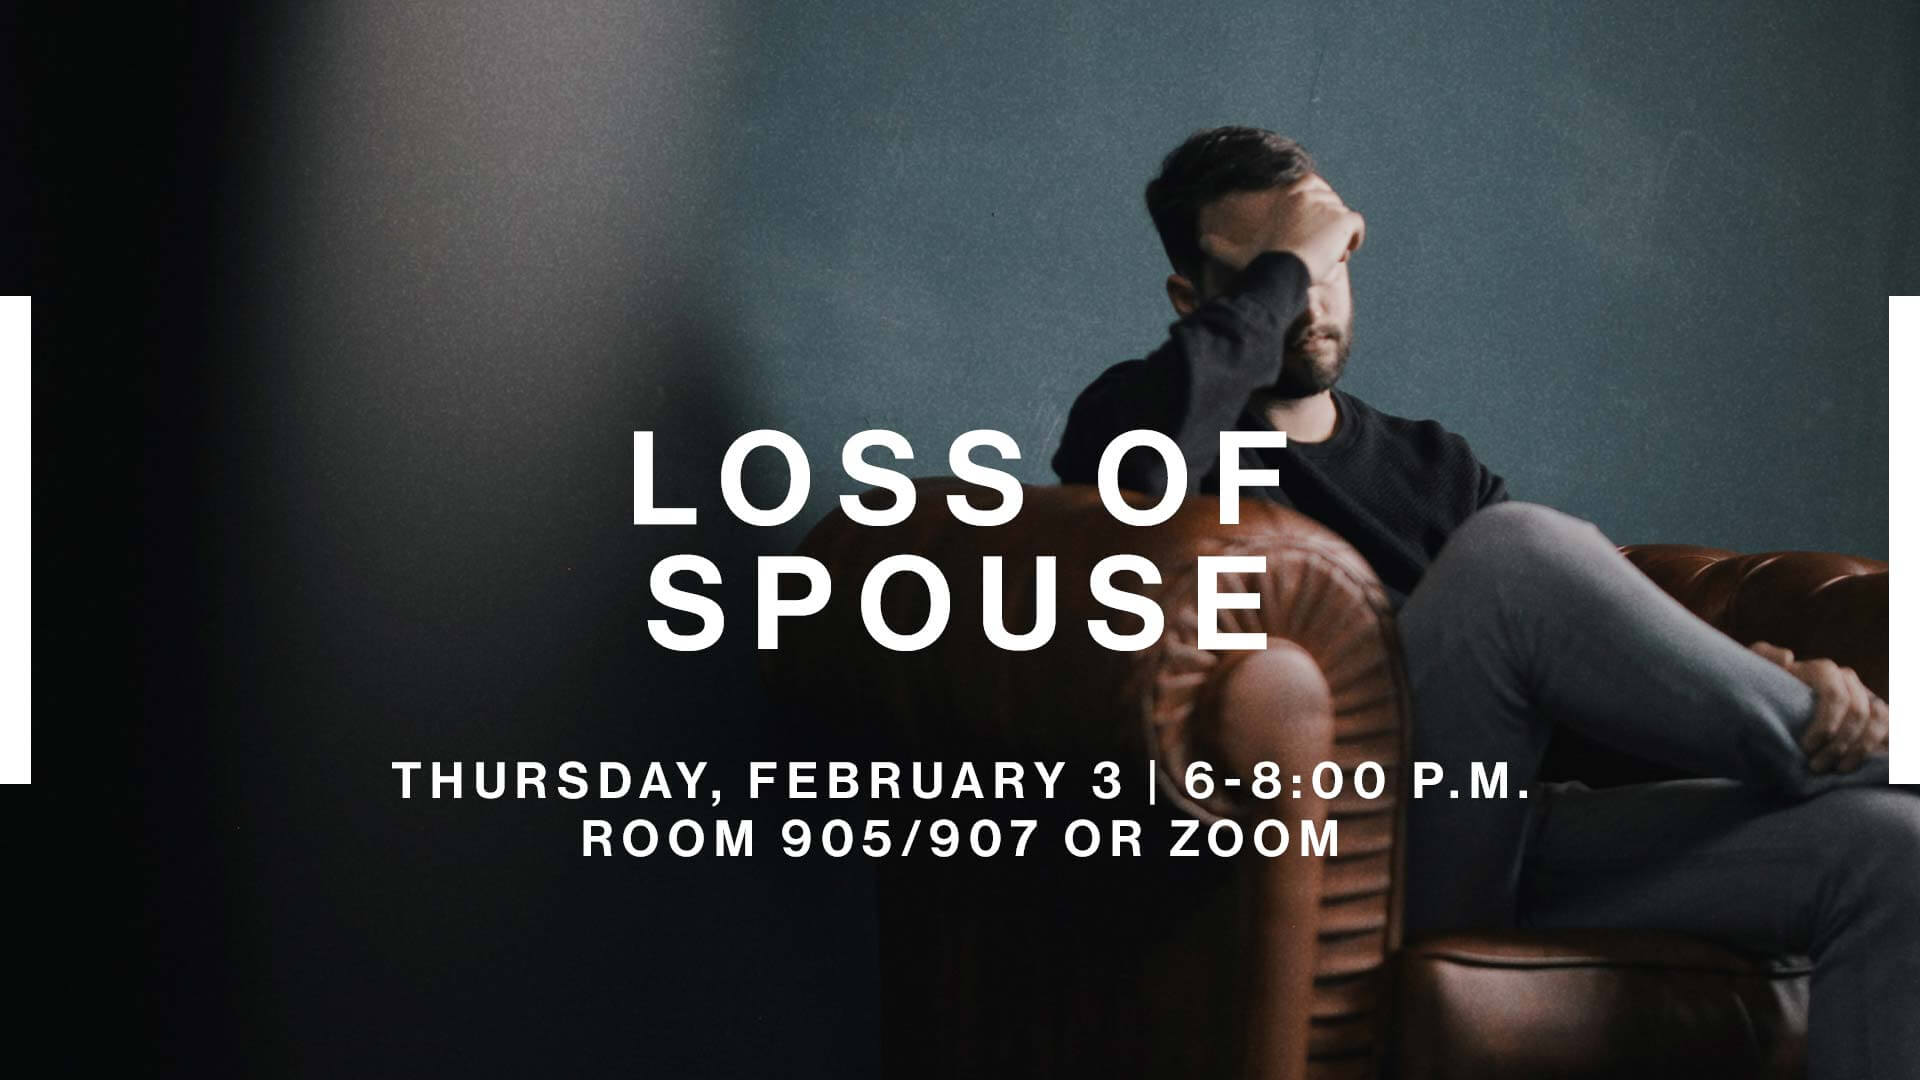 Life Groups: Loss of Spouse, Thursday, February 3 from 6-8:00 p.m. in room 905 and 907 or Zoom